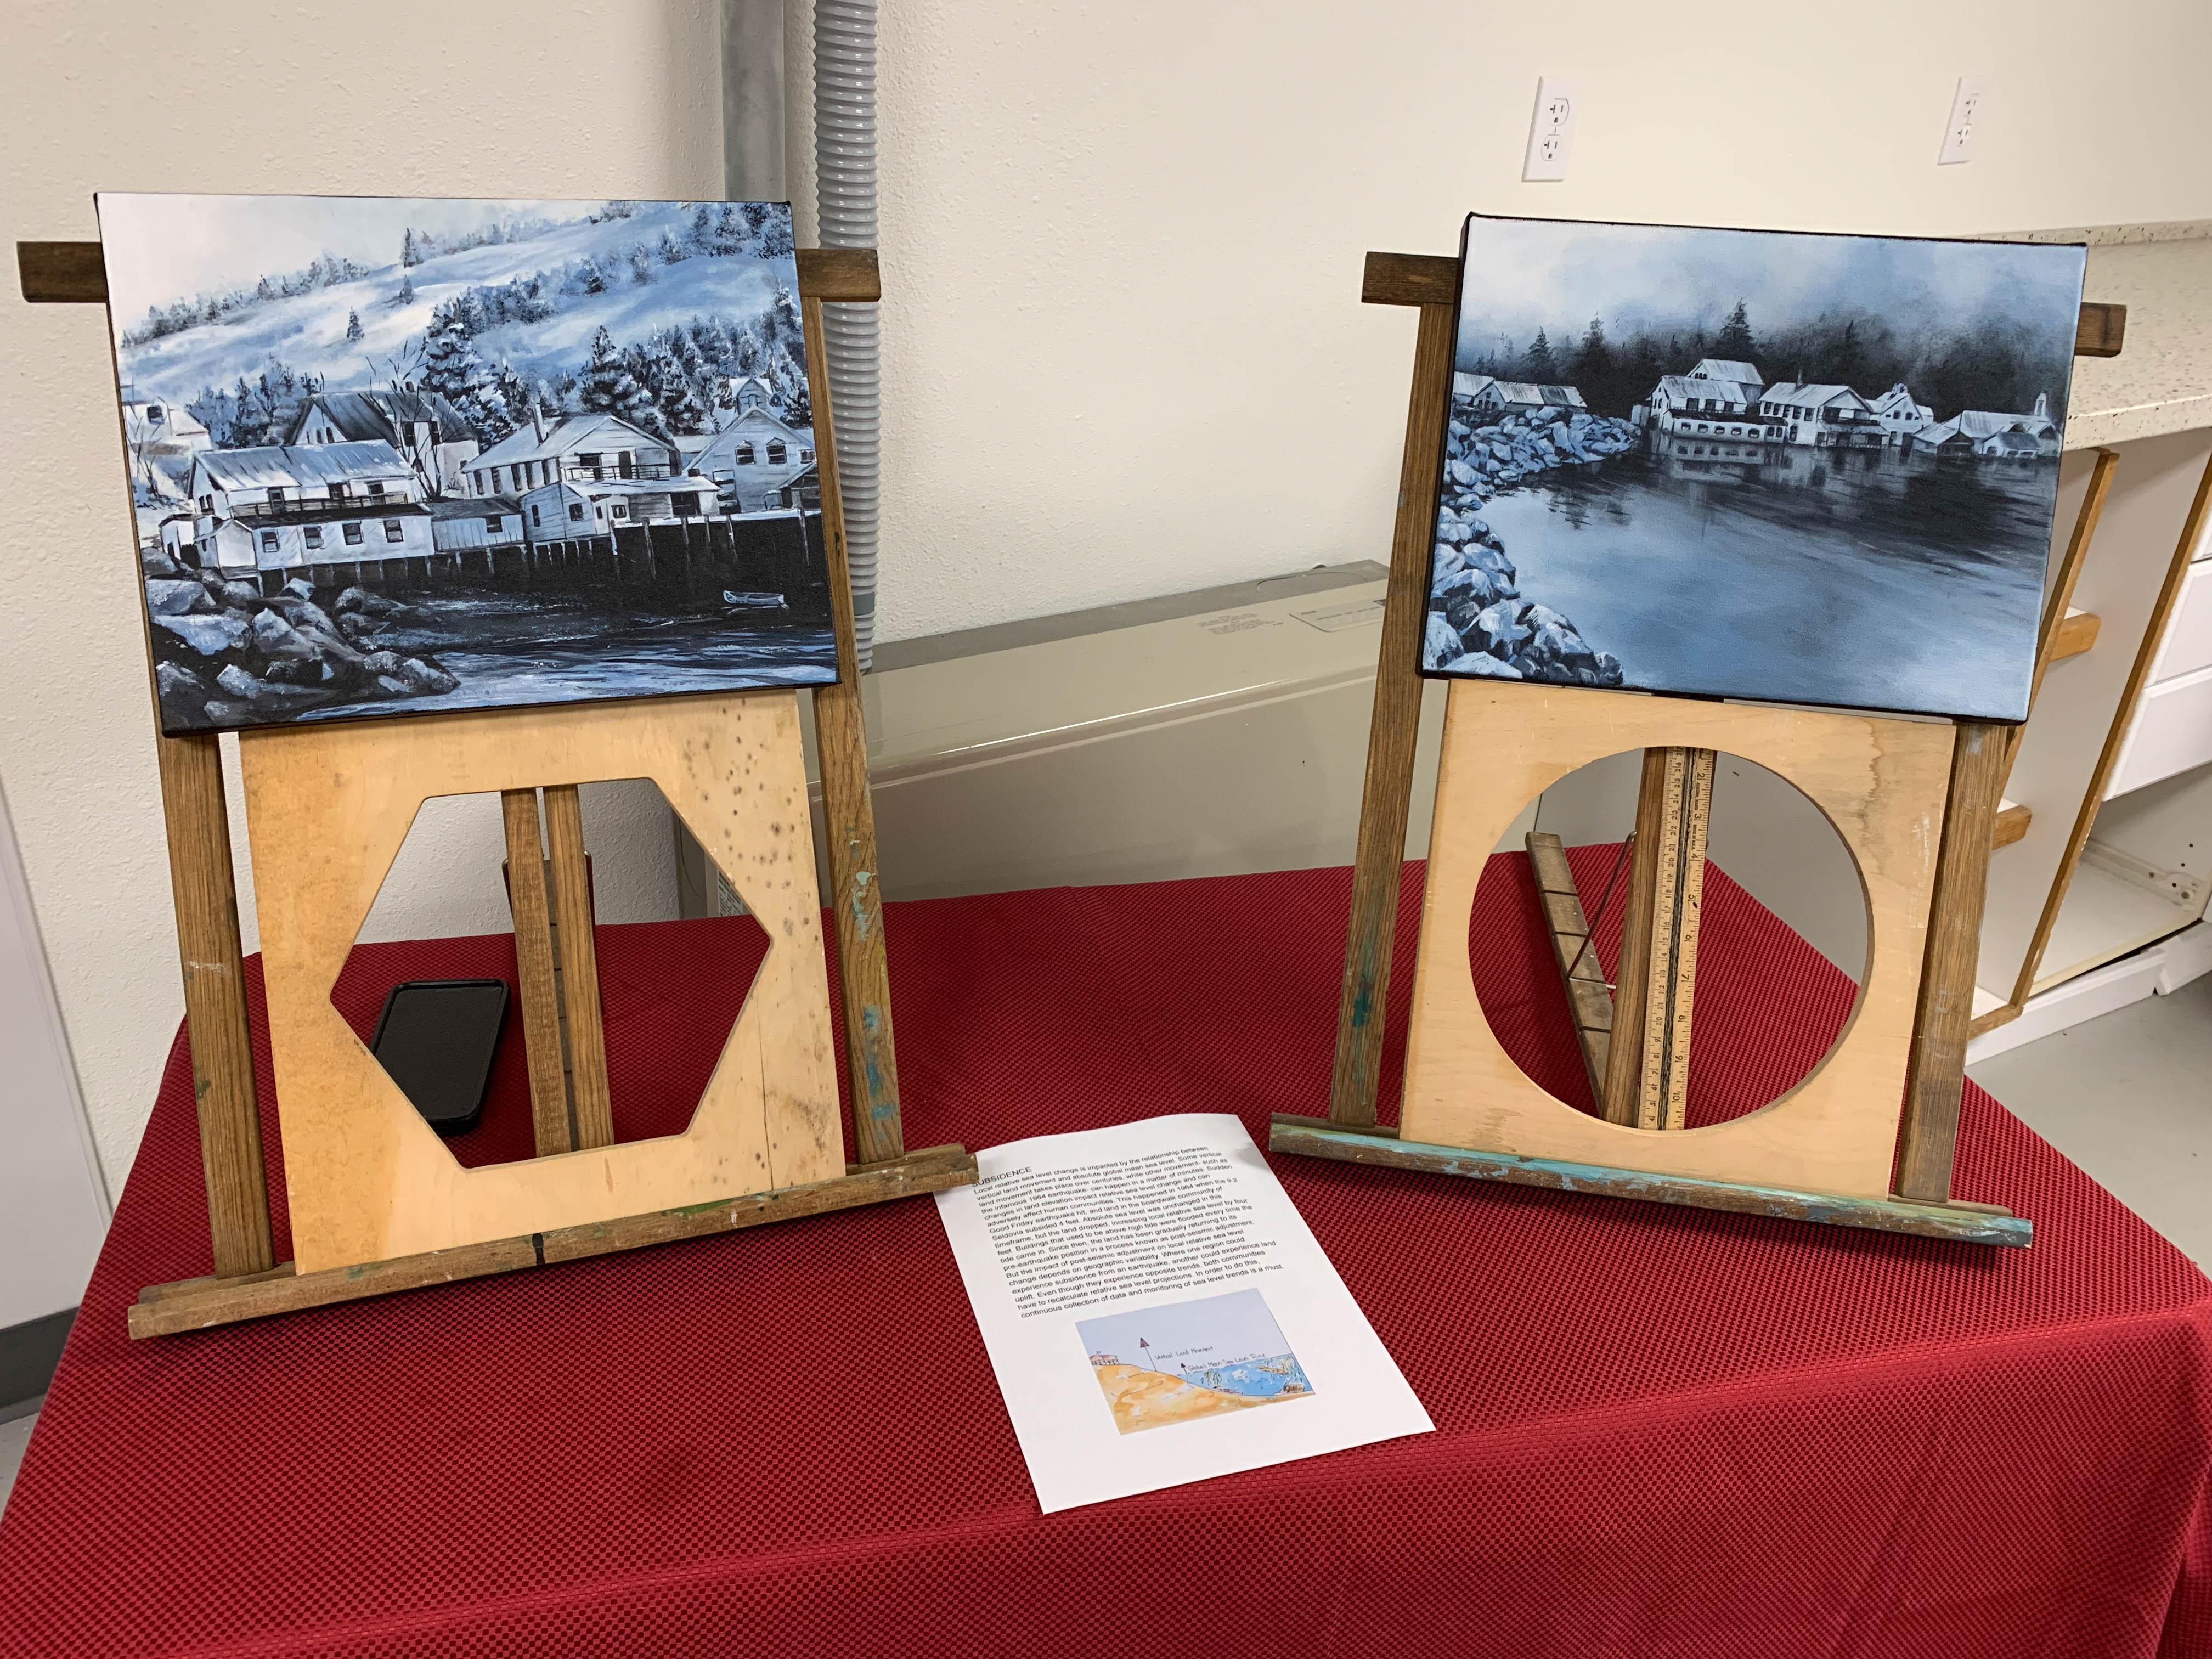 Two paintings displayed on a table. On the left is a snowy coastal town with a mountainous landscape behind it.  The painting rests on a wooden frame with a cut out hexagon. The right painting shows the same town from a more distant location, but the coastal waters now flood the town by what appears to be a few feet above the elevated frames that many houses rested on. The painting is on a wooden frame with a circle cutout and a ruler in the circular opening. 